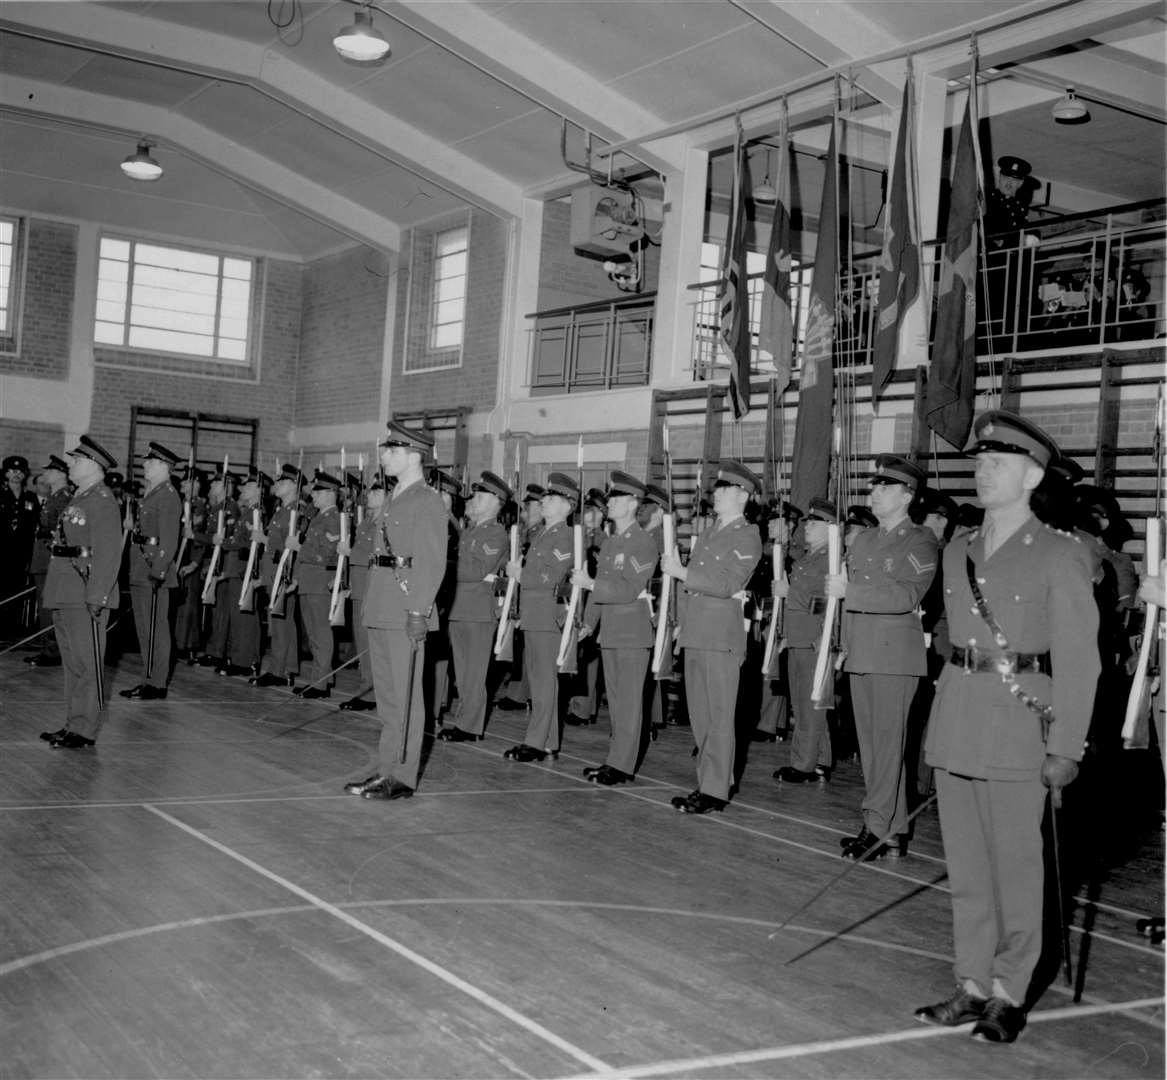 The flags of four famous regiments were lowered for the last time at Howe Barracks in Canterbury in December 1966. With them came down the flag of the Home Counties Brigade Depot. The ceremony marked the passing of four Home Counties regiments: The Queens Royal Surrey, Queen's Own Buffs (The Royal Kent Regiment), Royal Sussex and Middlesex. Seconds later a fanfare sounded and a new flag was raised, marking the birth of the Queen's Regiment